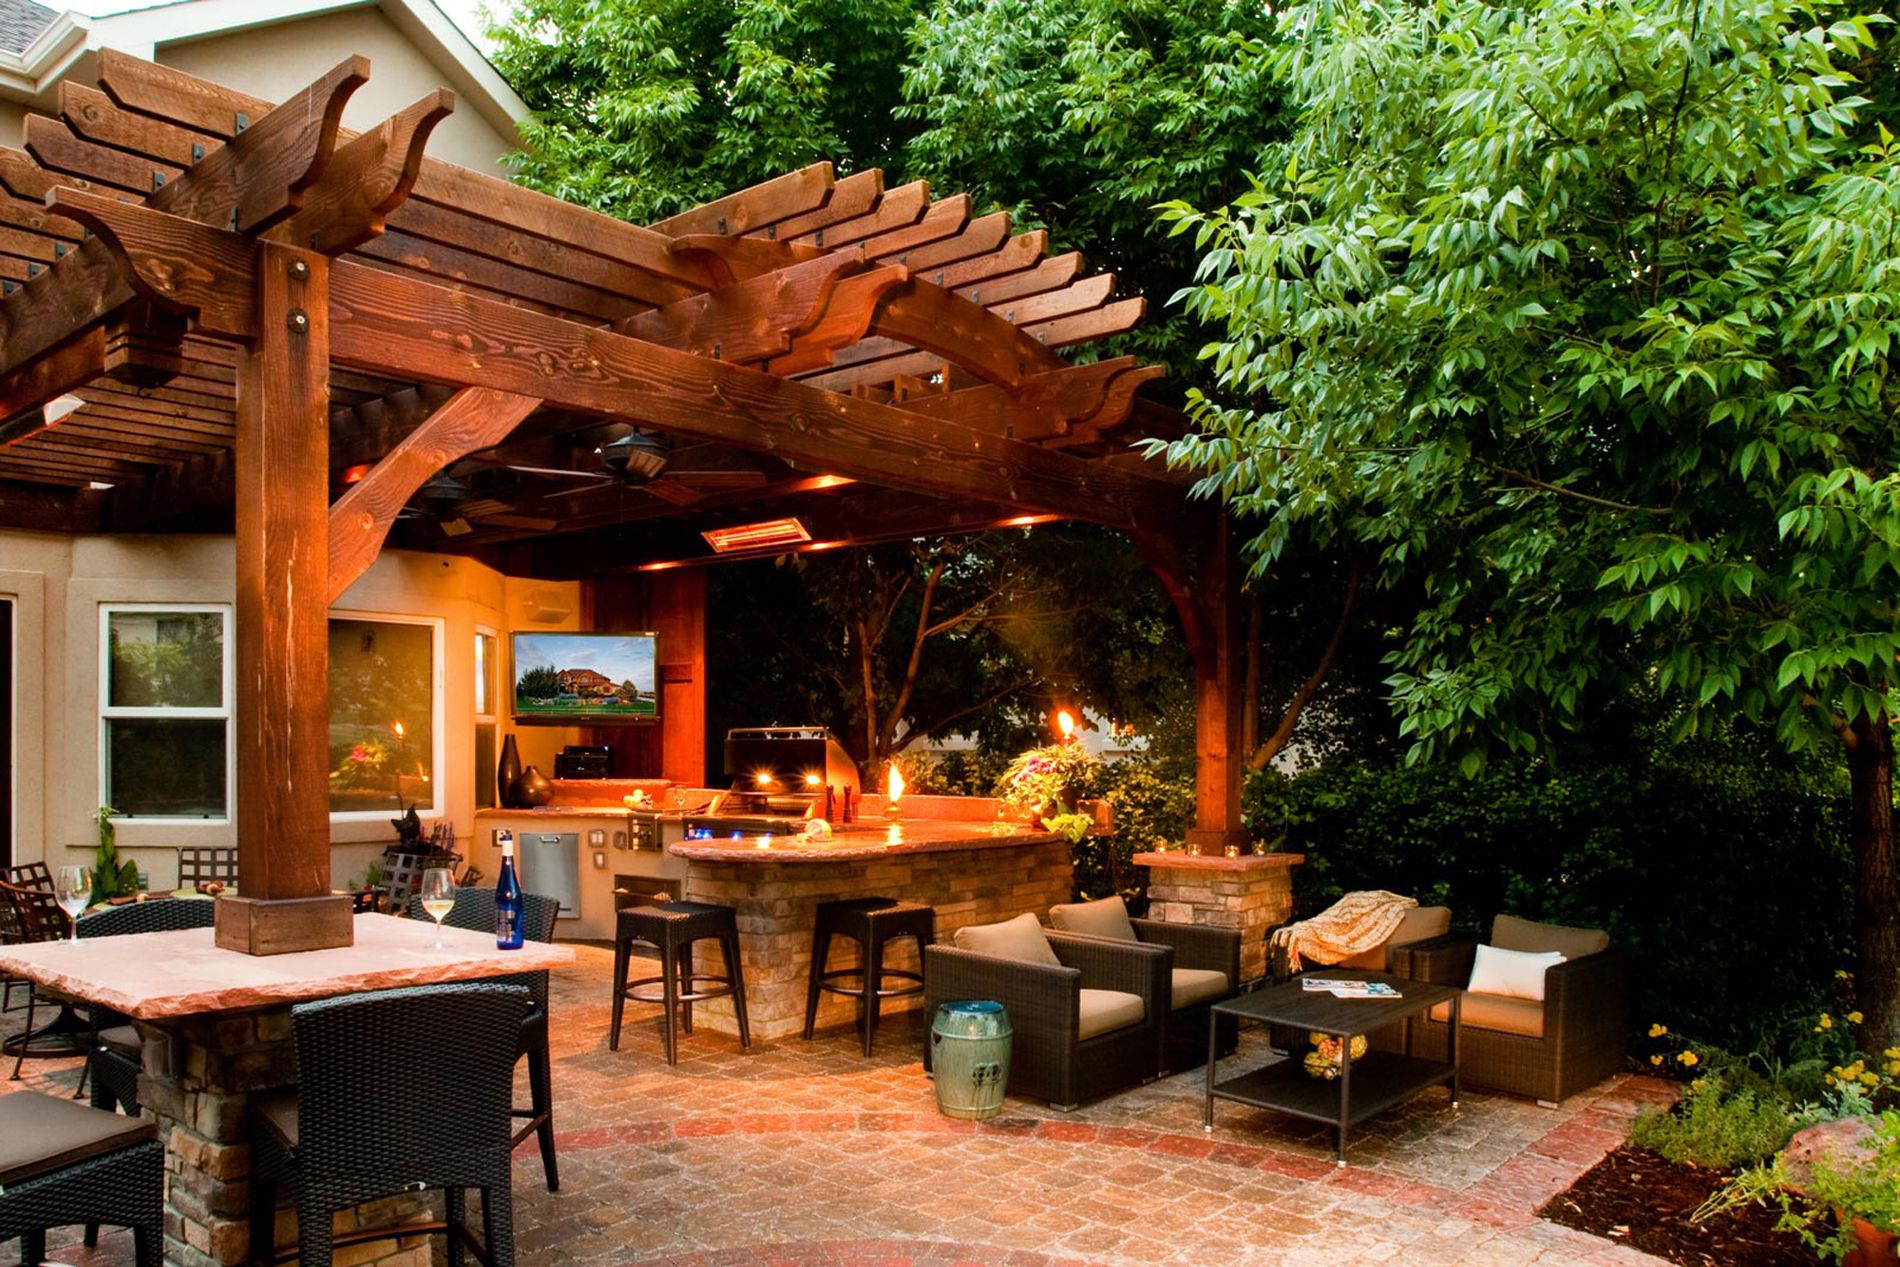 Outdoor Kitchen With Paver Patio and Shade Structure at Night